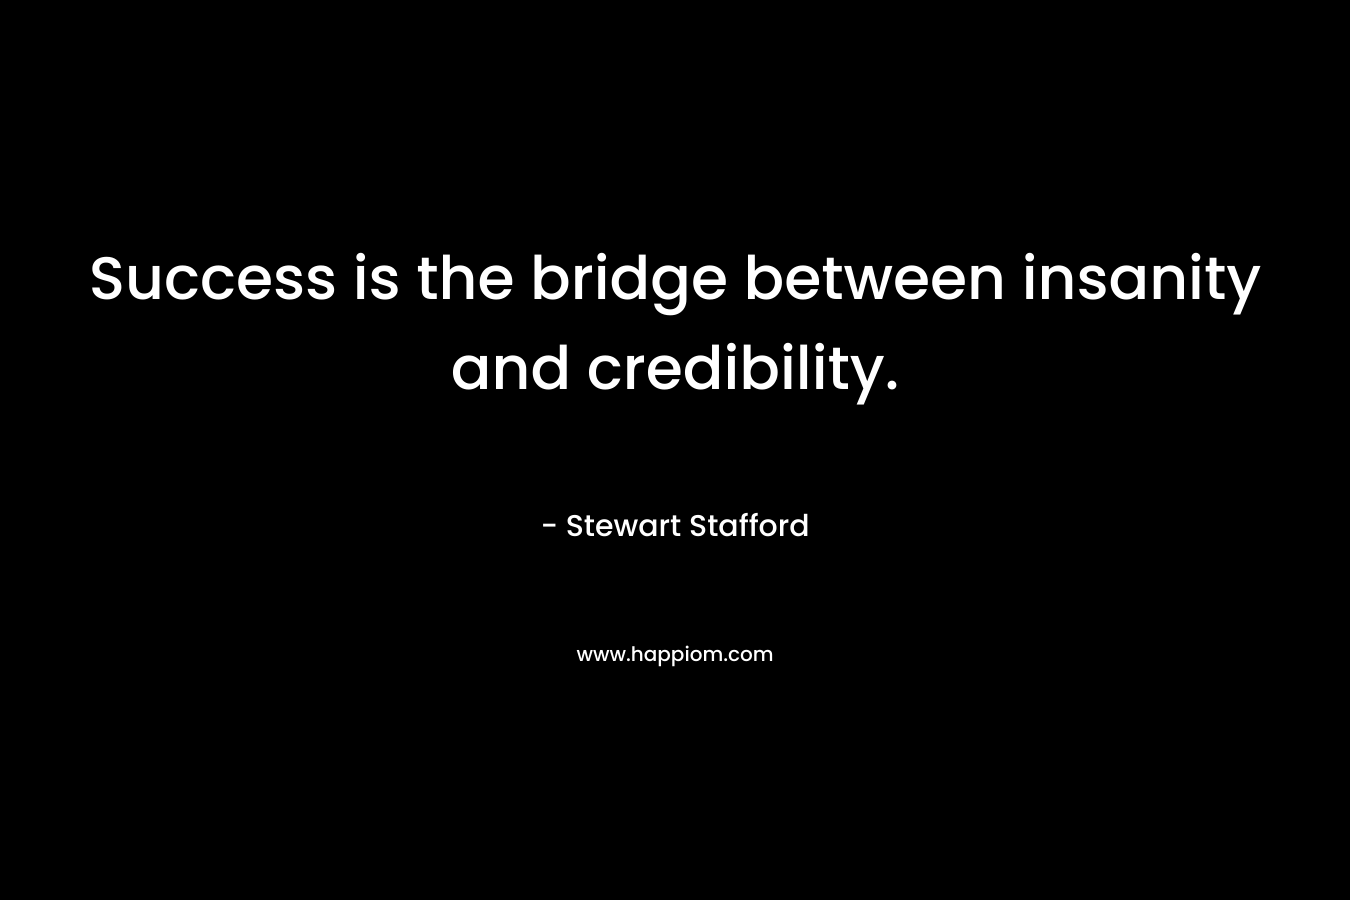 Success is the bridge between insanity and credibility.